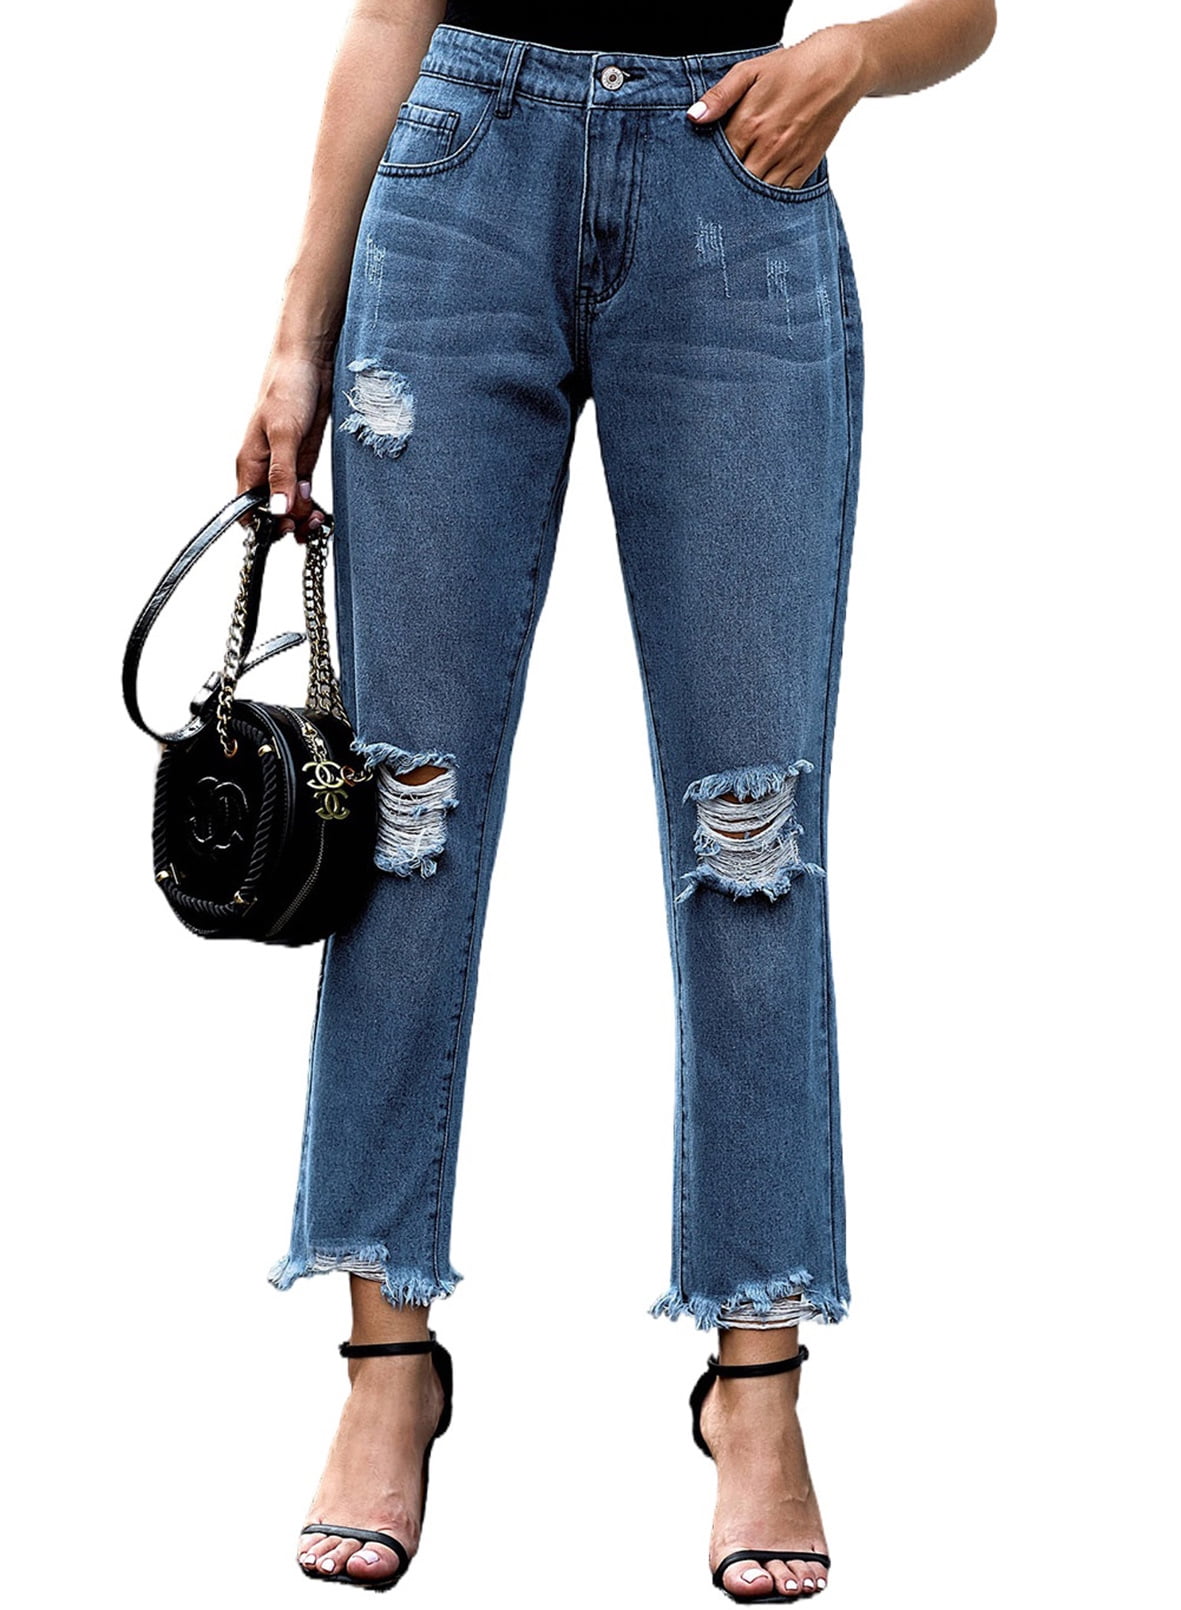 High Waist Skinny Stretch Ripped Jeans for Women Destroyed Denim Cropped Pants. 